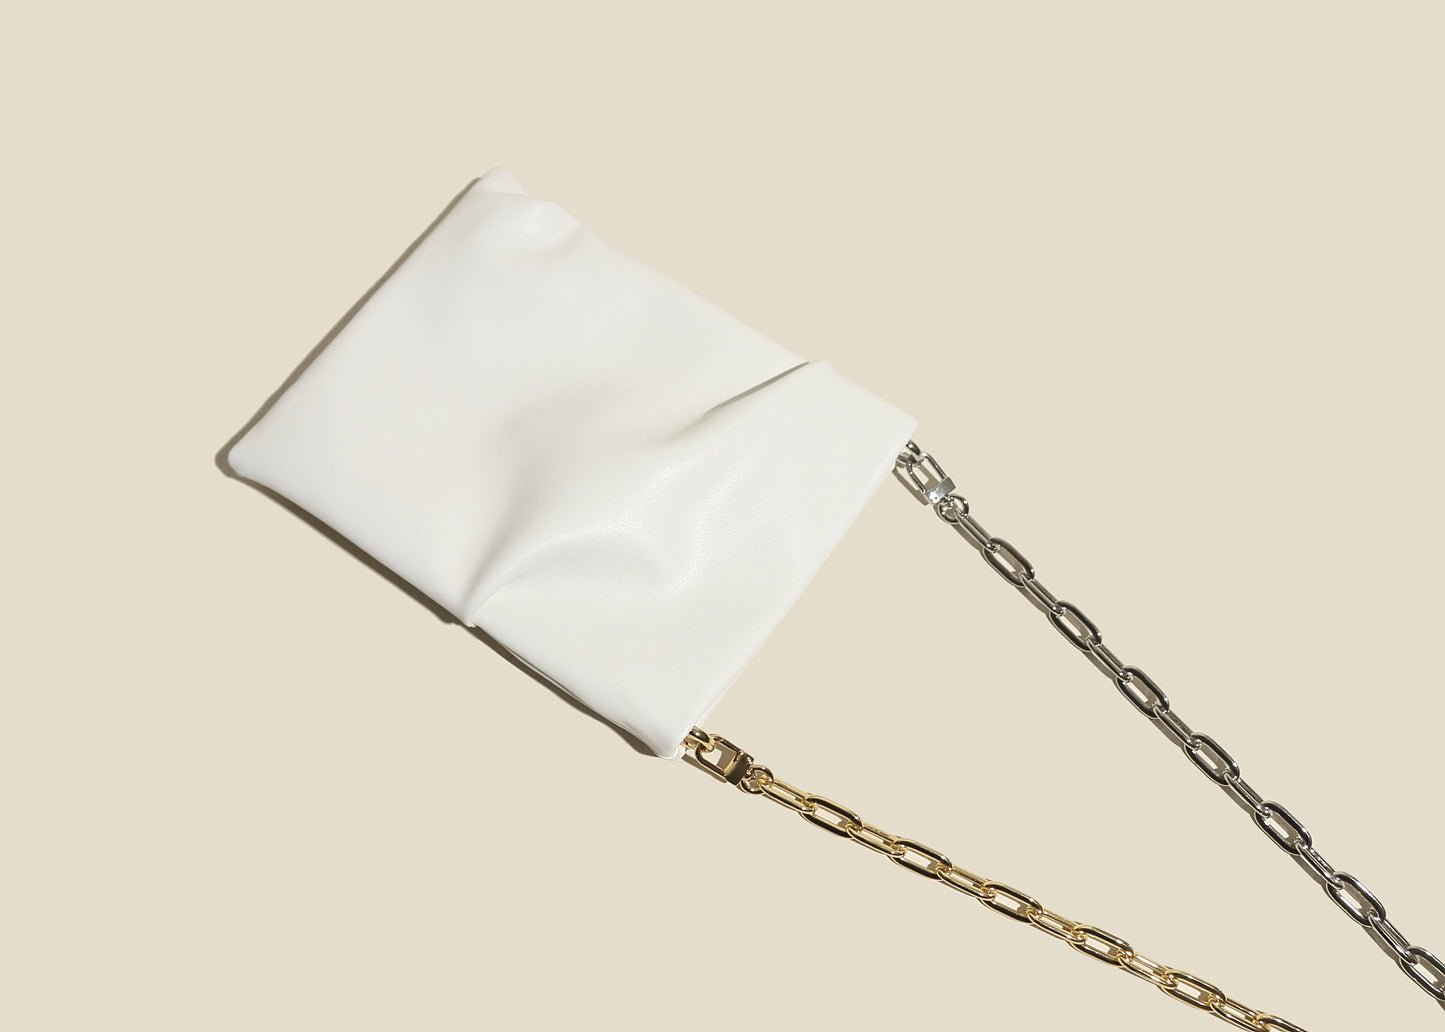 WHITE silver gold two TONE LINK CHAIN soft LEATHER shoulder BAG